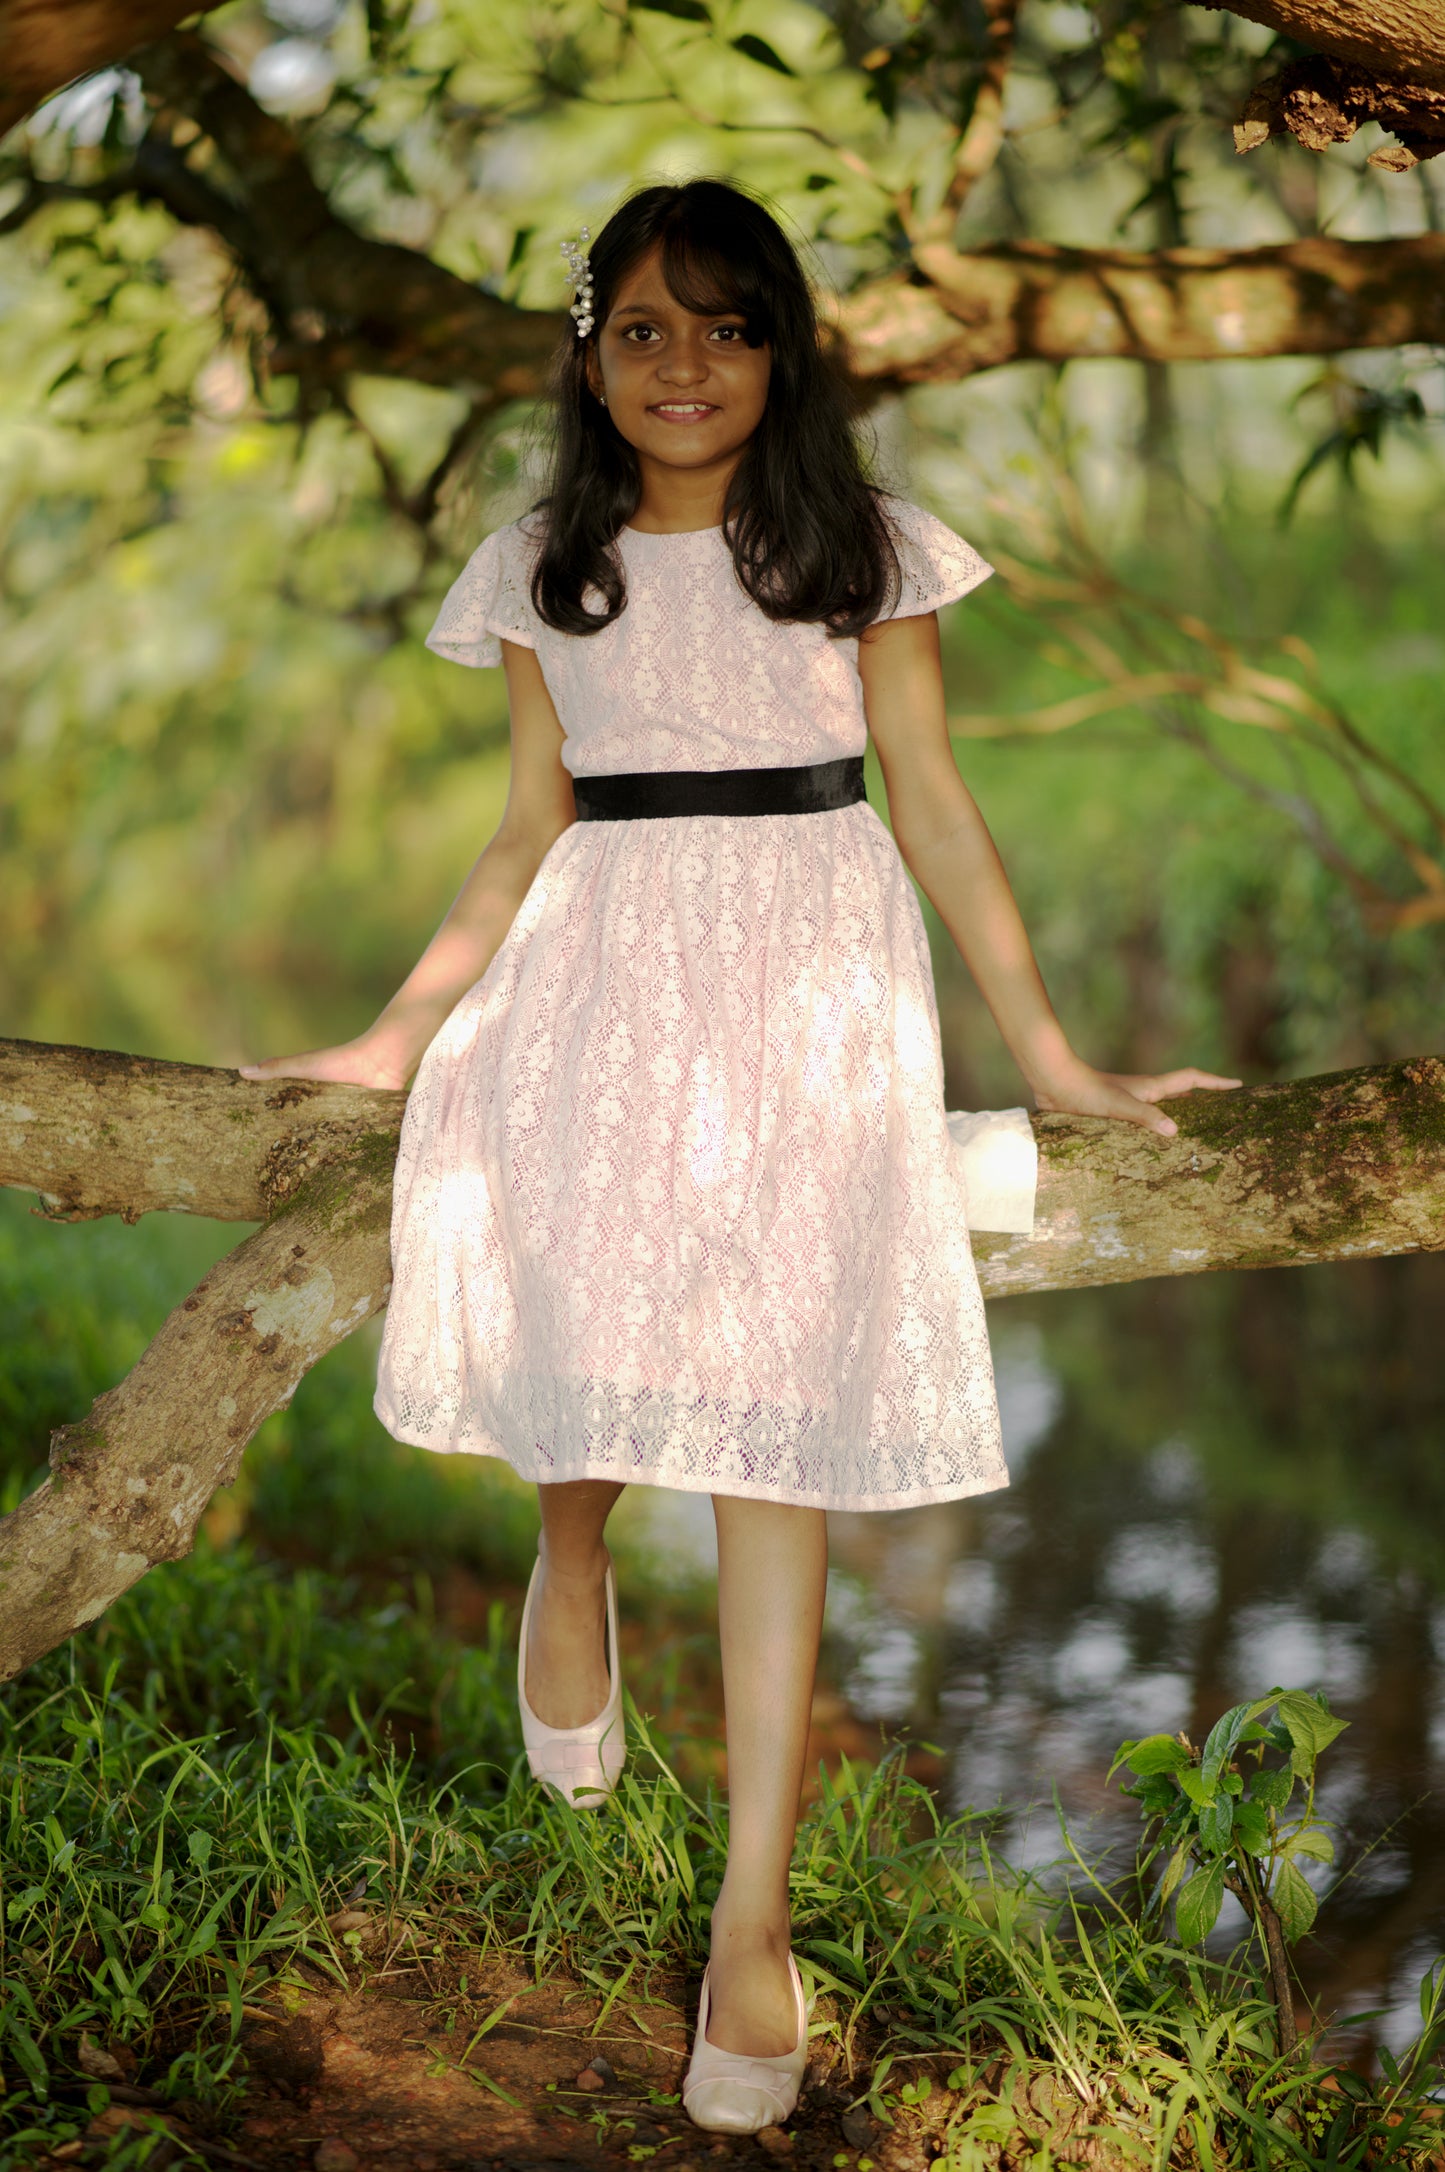 Kids lace frock in baby pink shade